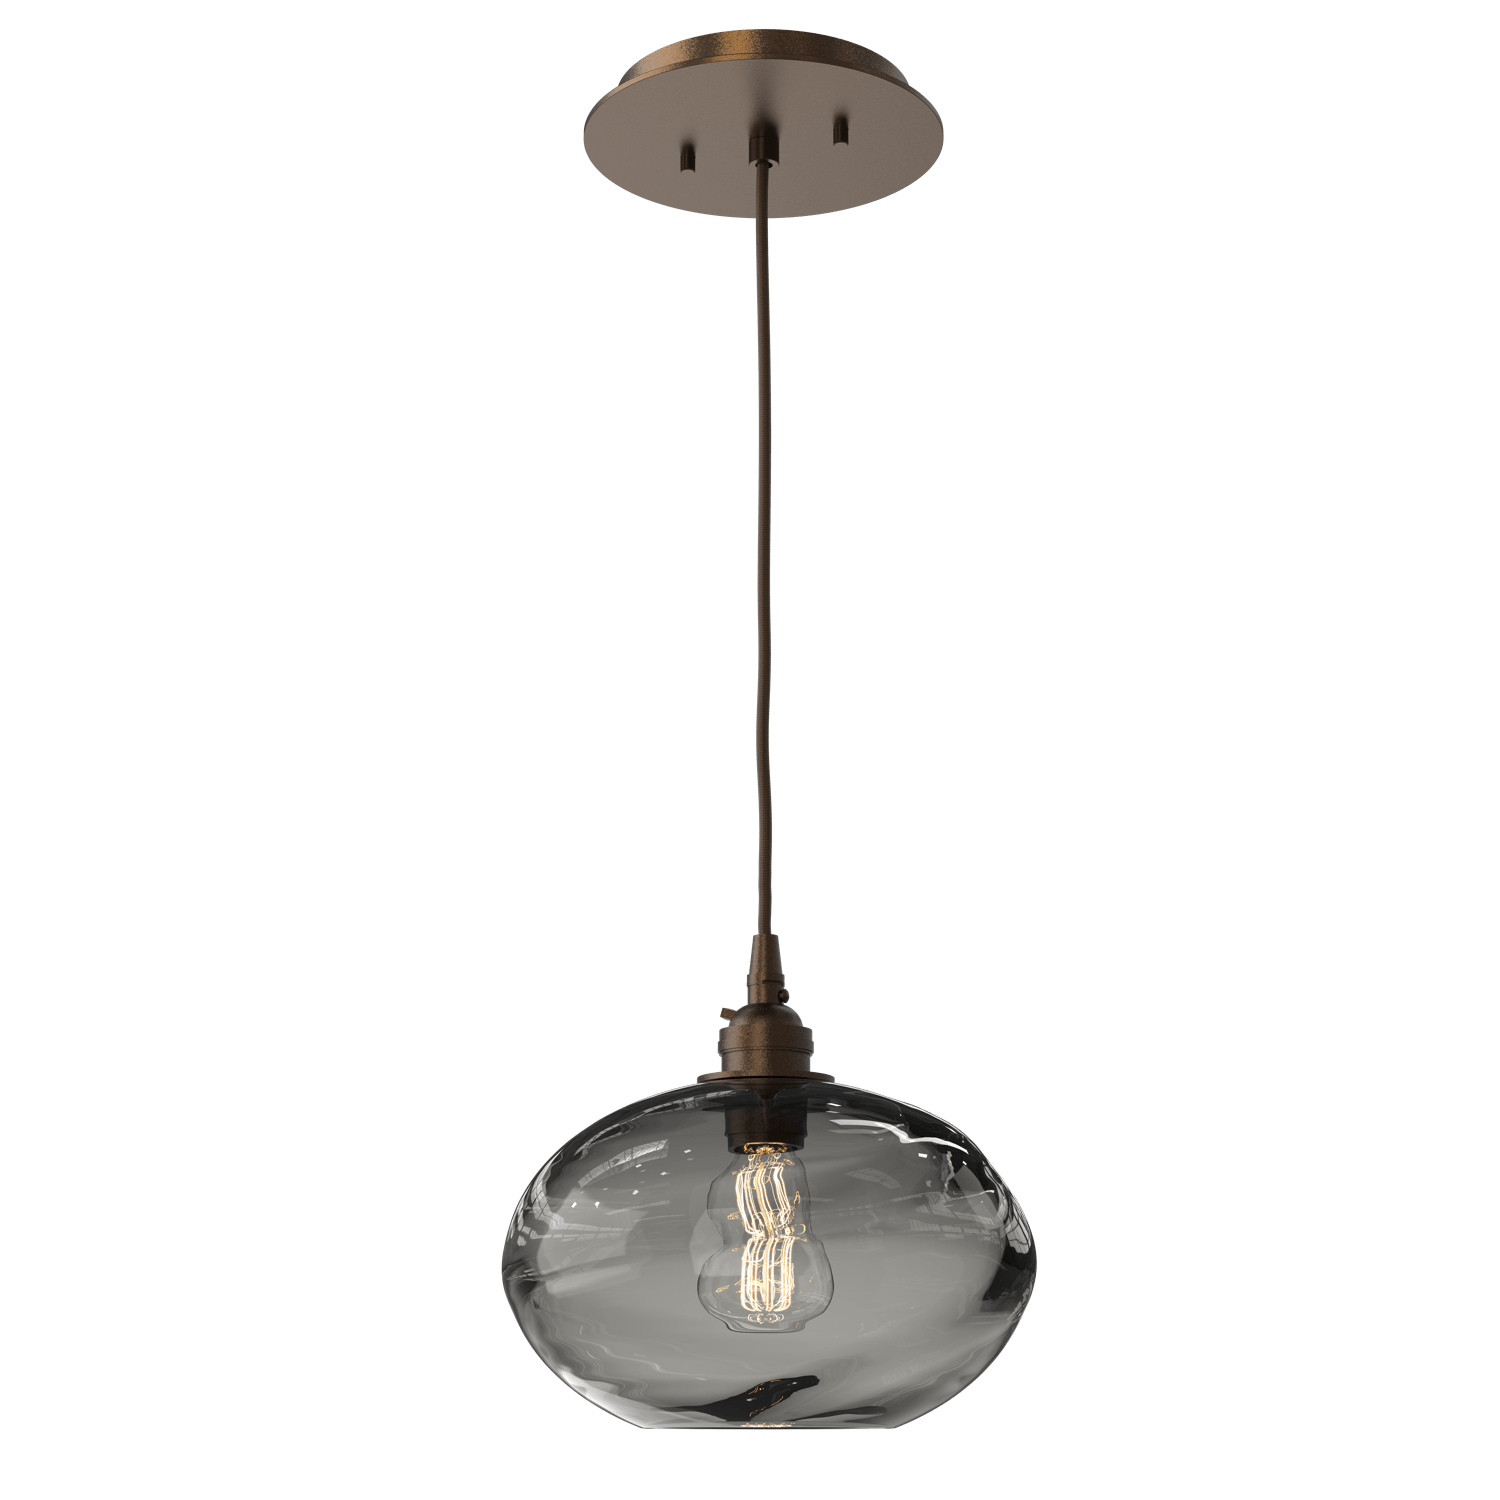 LAB0036-01-FB-OS-Hammerton-Studio-Optic-Blown-Glass-Coppa-pendant-light-with-flat-bronze-finish-and-optic-smoke-blown-glass-shades-and-incandescent-lamping